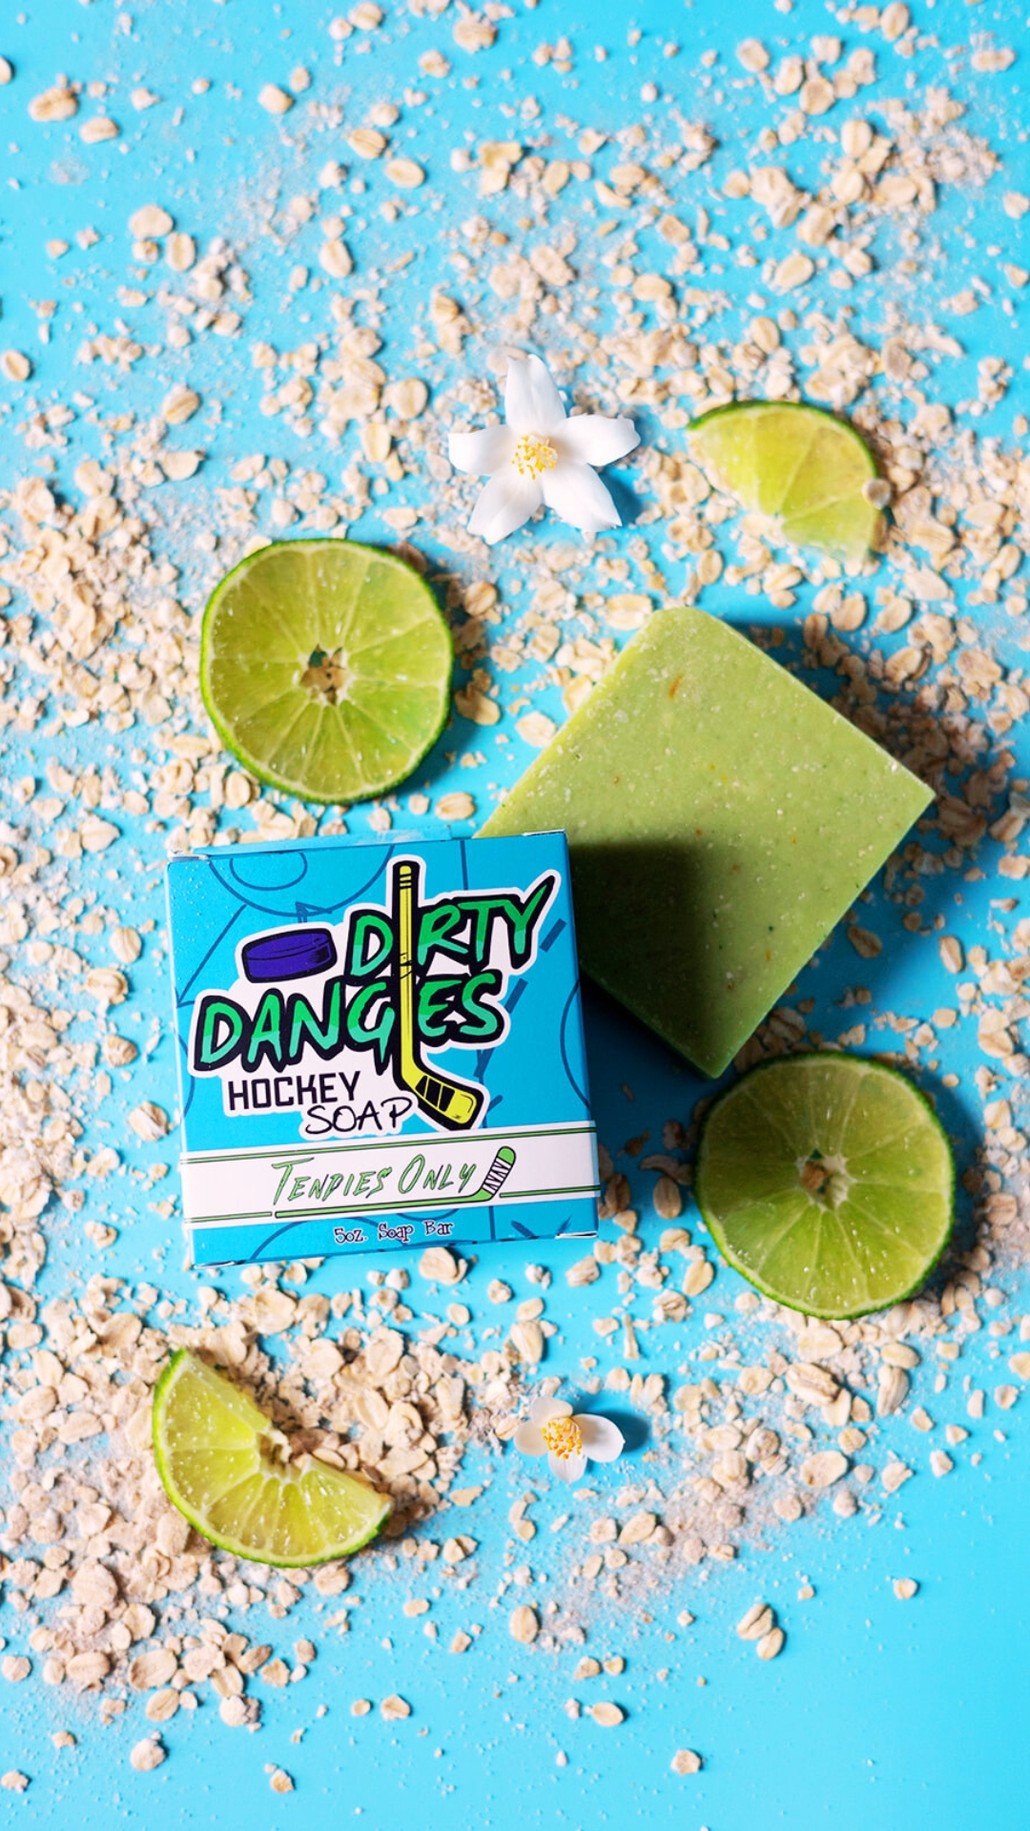 A green bar of dirty dangles hockey soap on a blue background with oats and limes